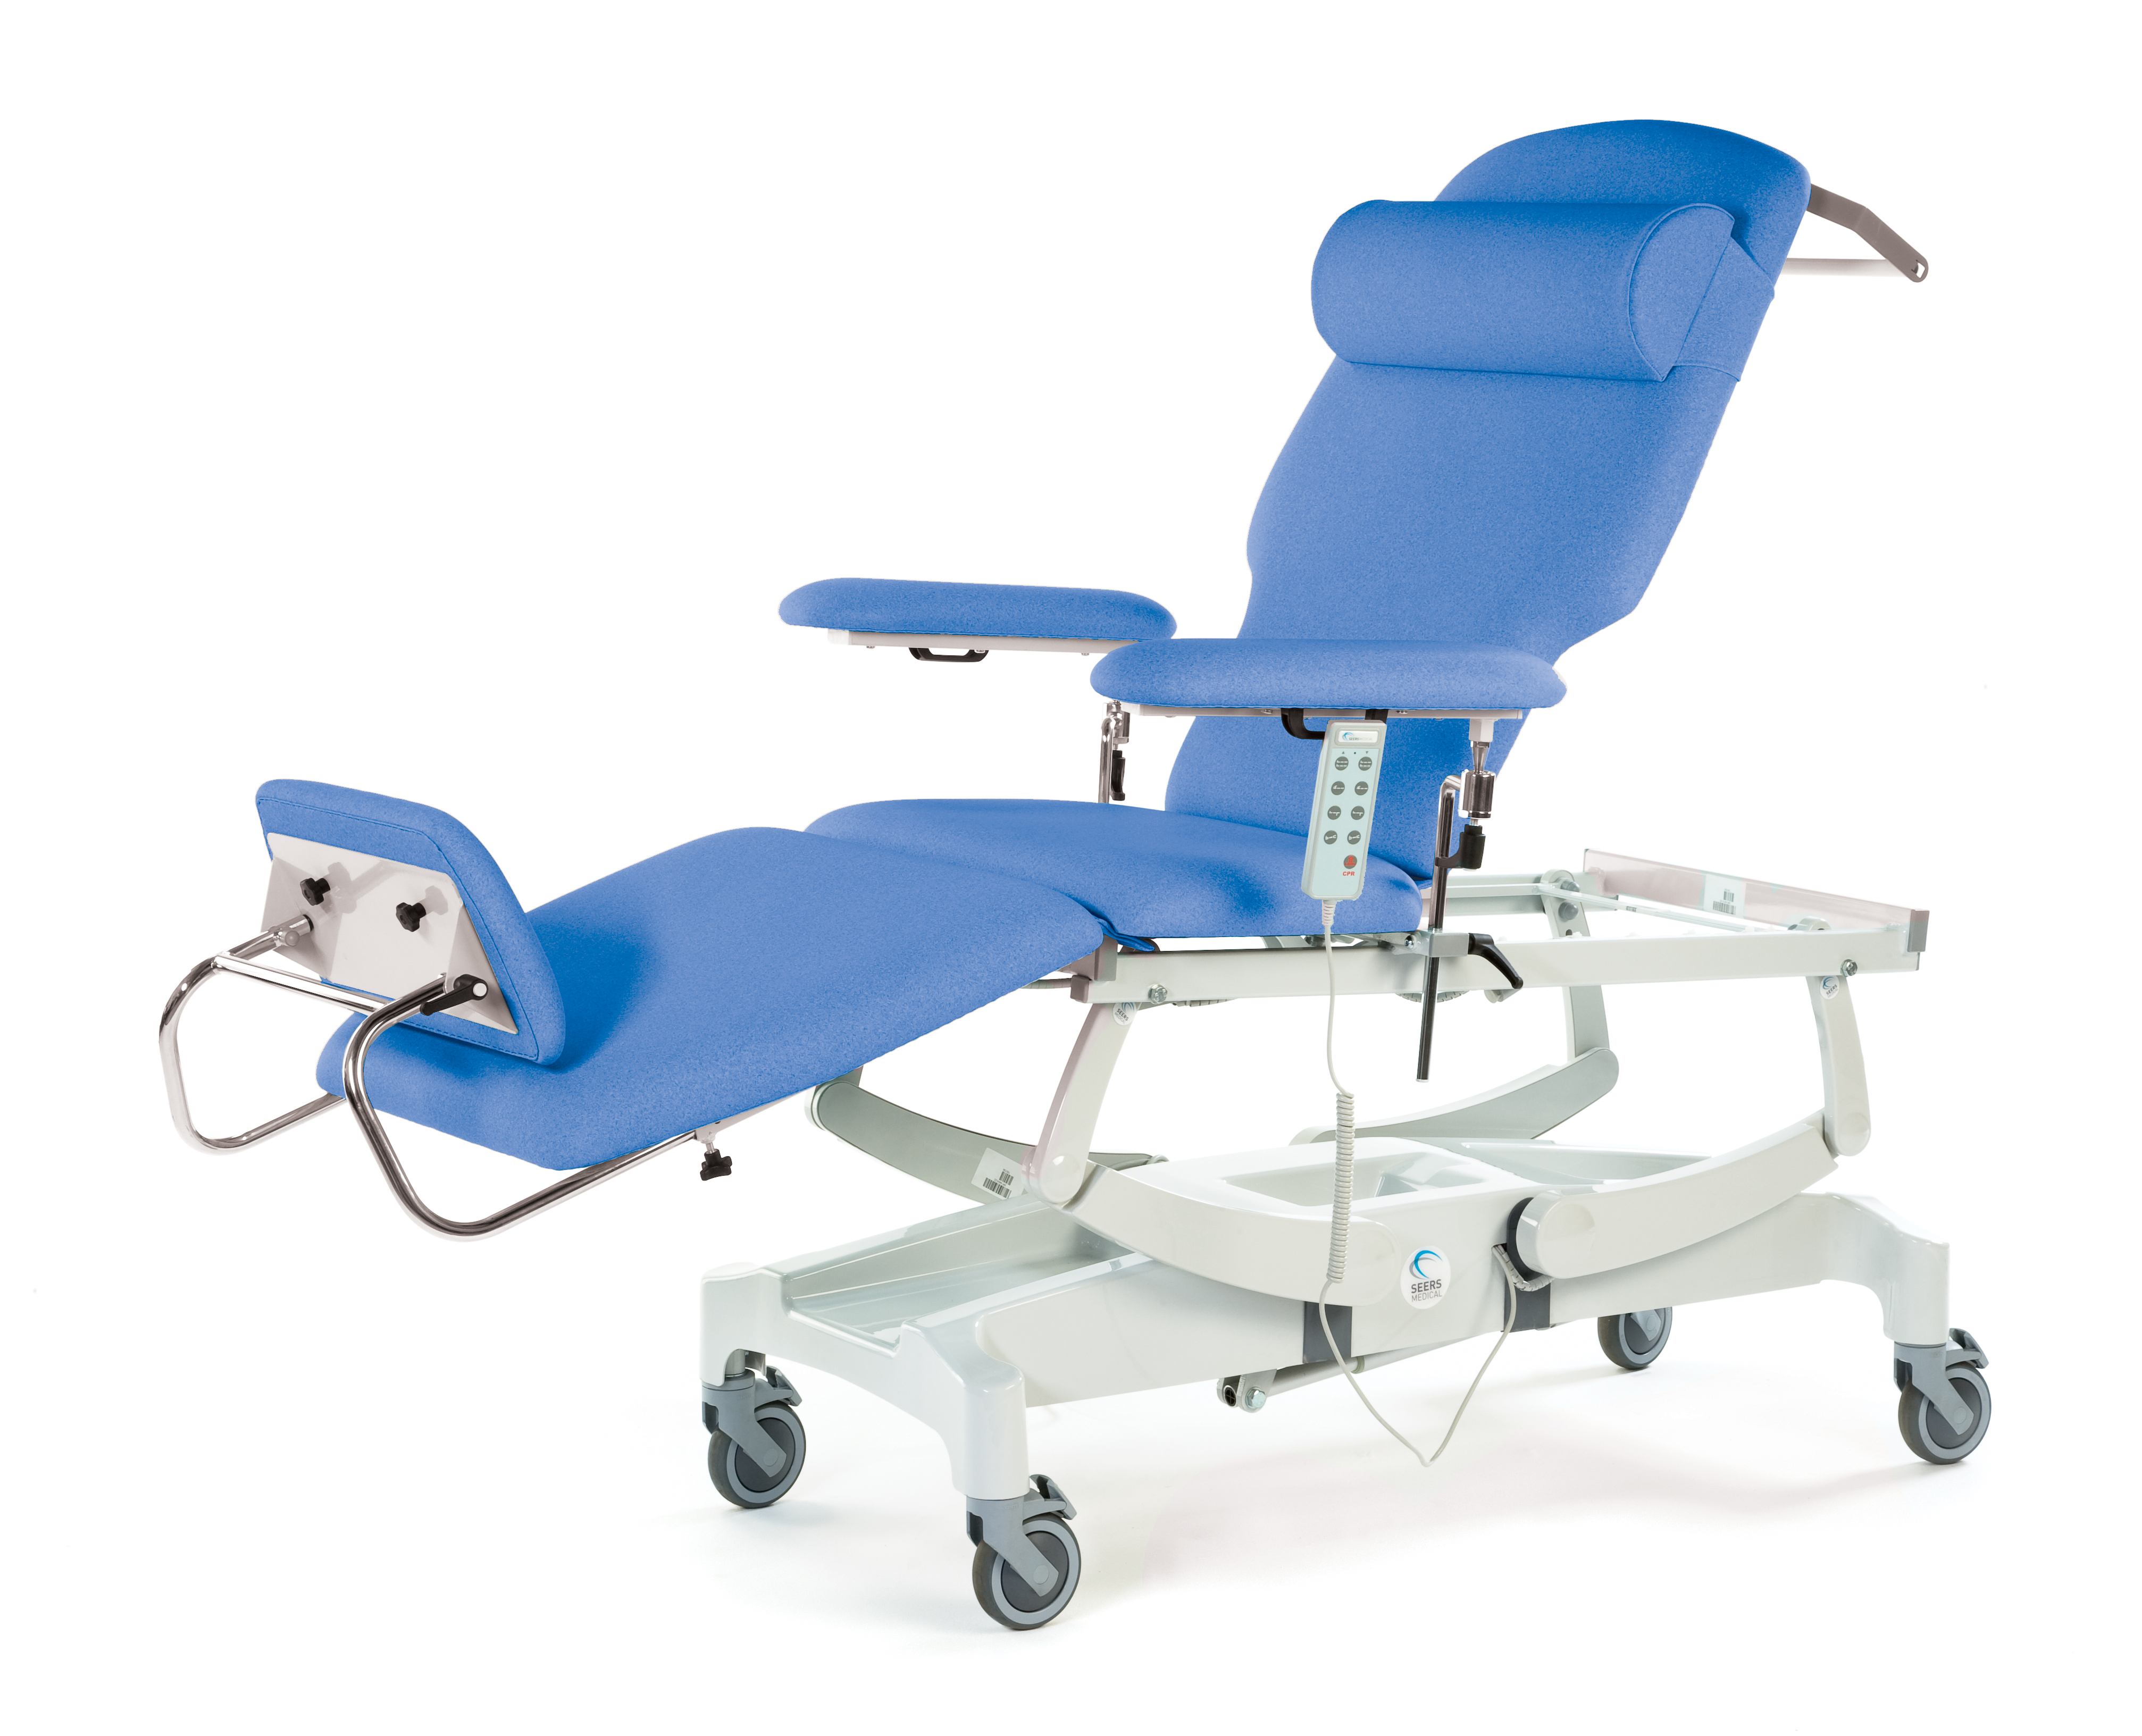 SEERS Innovation Deluxe Dialysis Couch